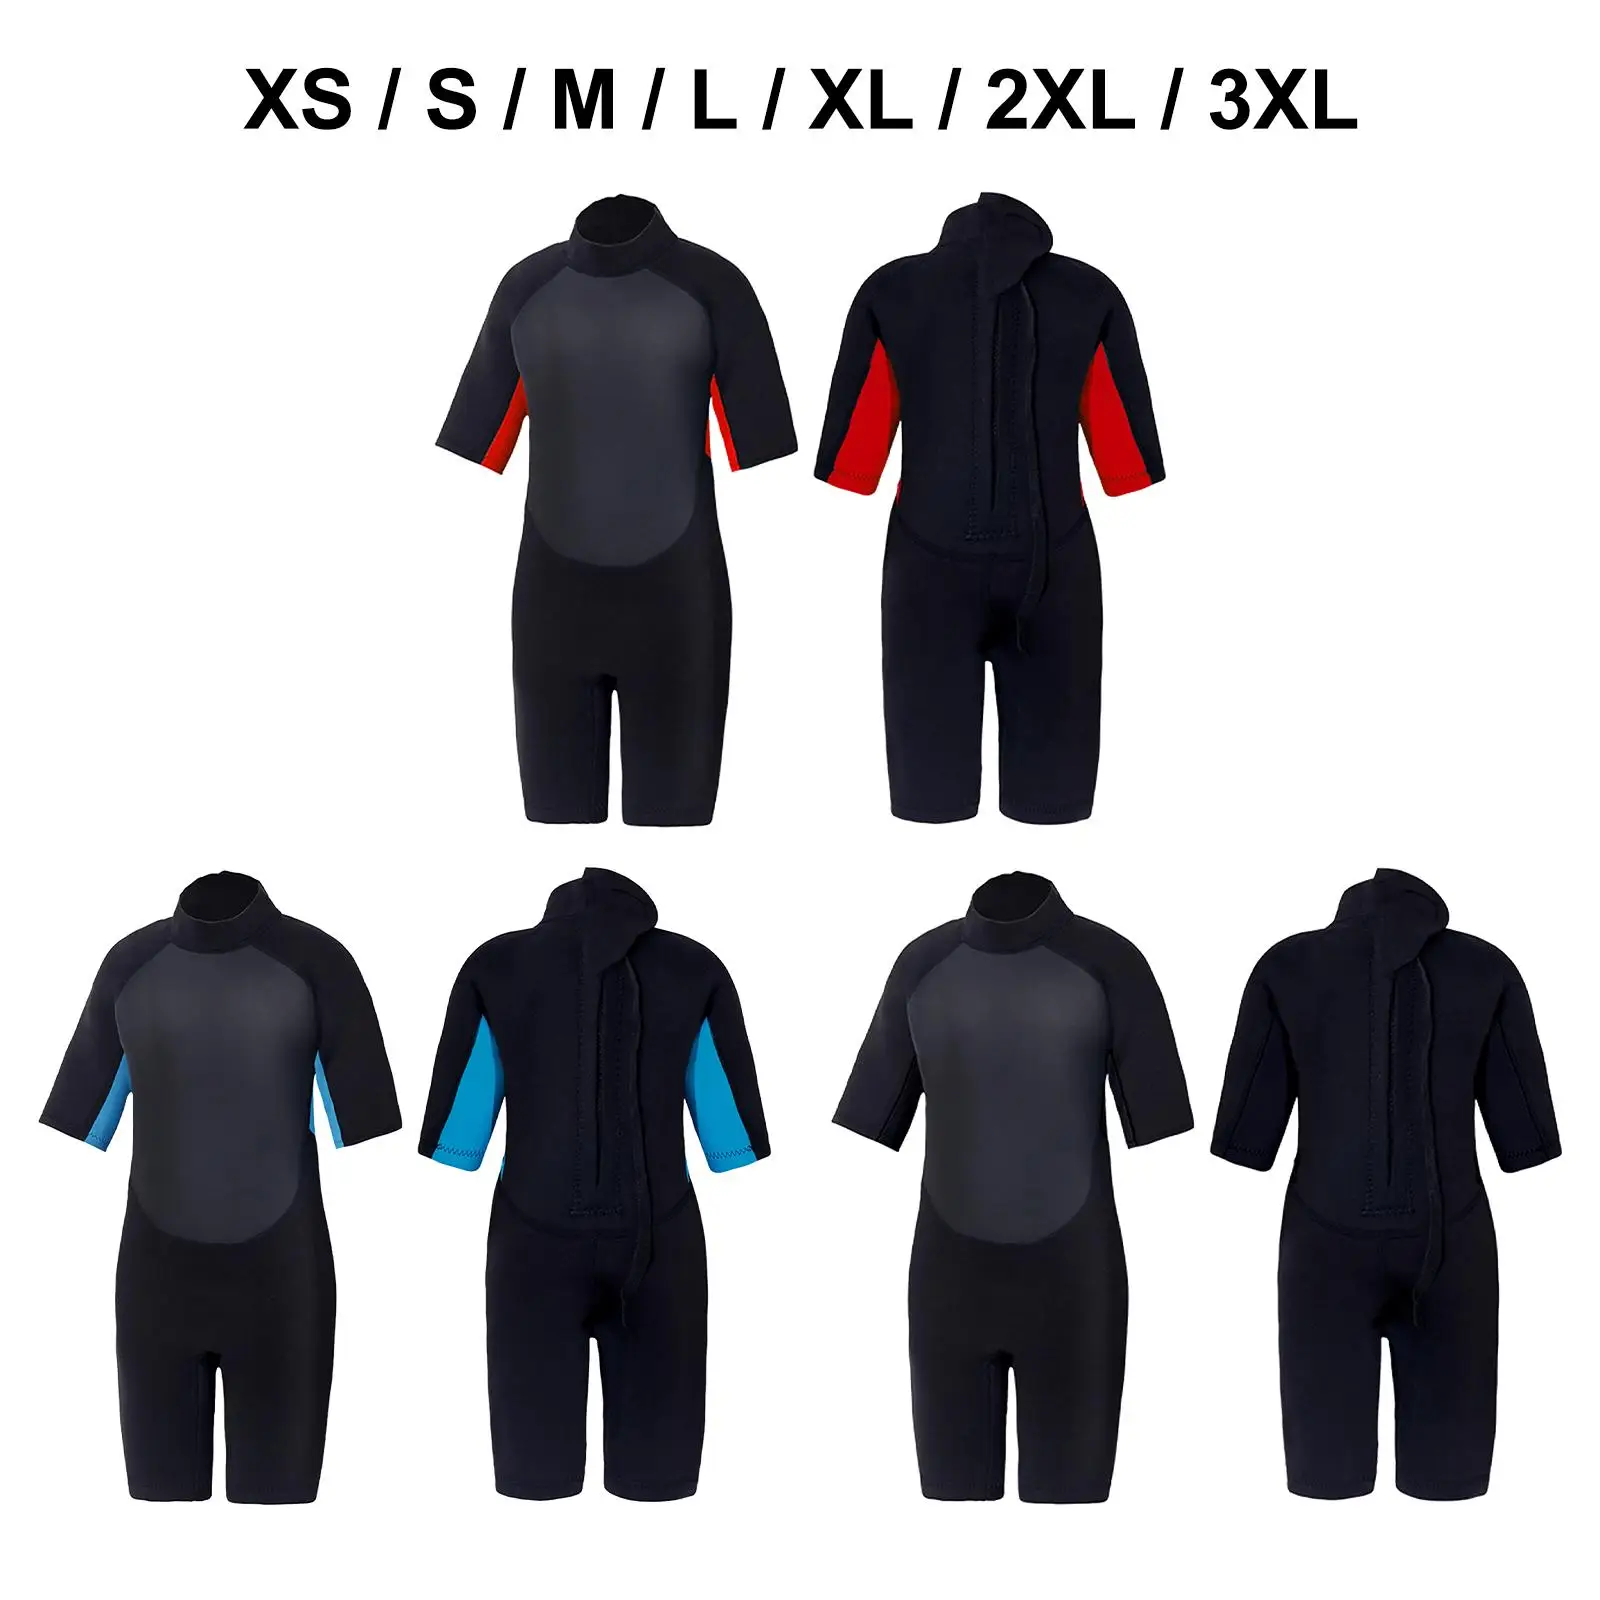 3mm Premium Neoprene Kids Shorty Wetsuit Diving Suit for Scuba Diving Youth